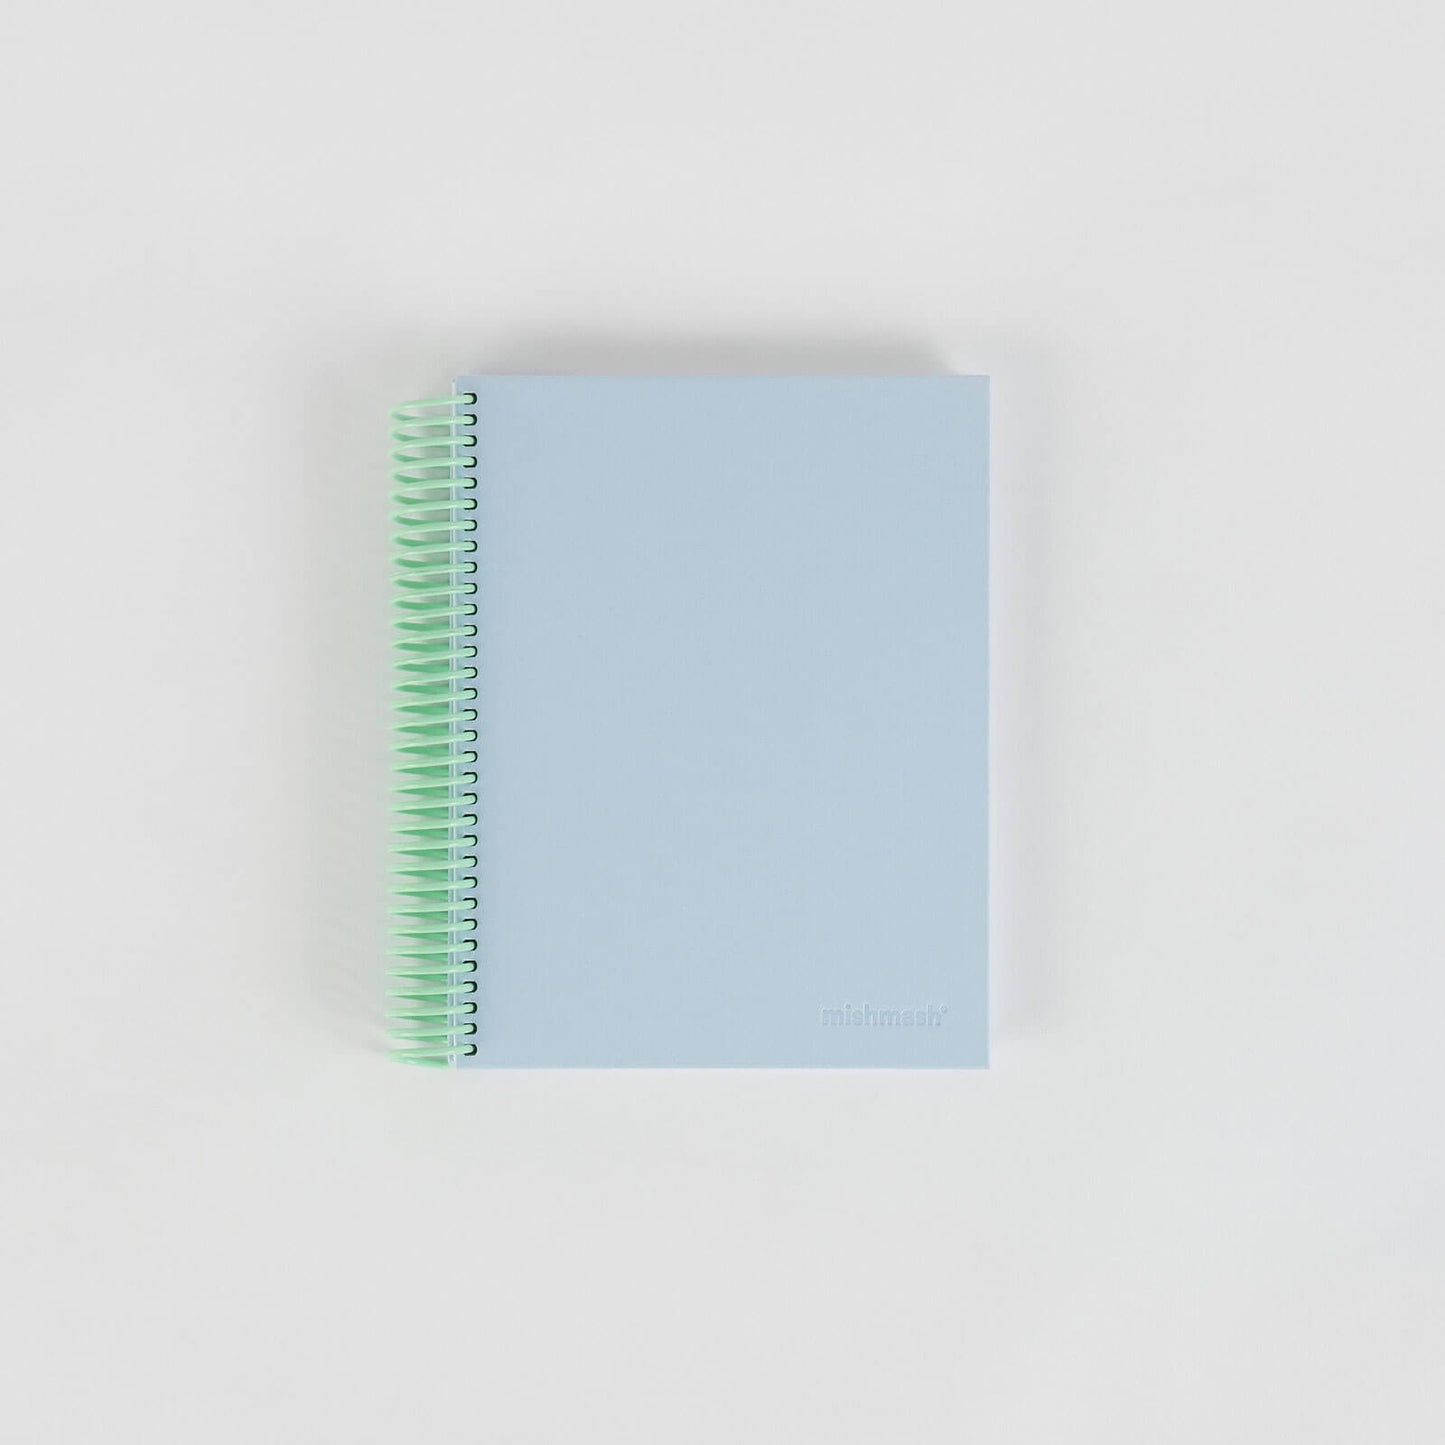 Easy Breezy Spiral Notebook by Mishmash - Sky Blue - Ruled - by Mishmash - K. A. Artist Shop